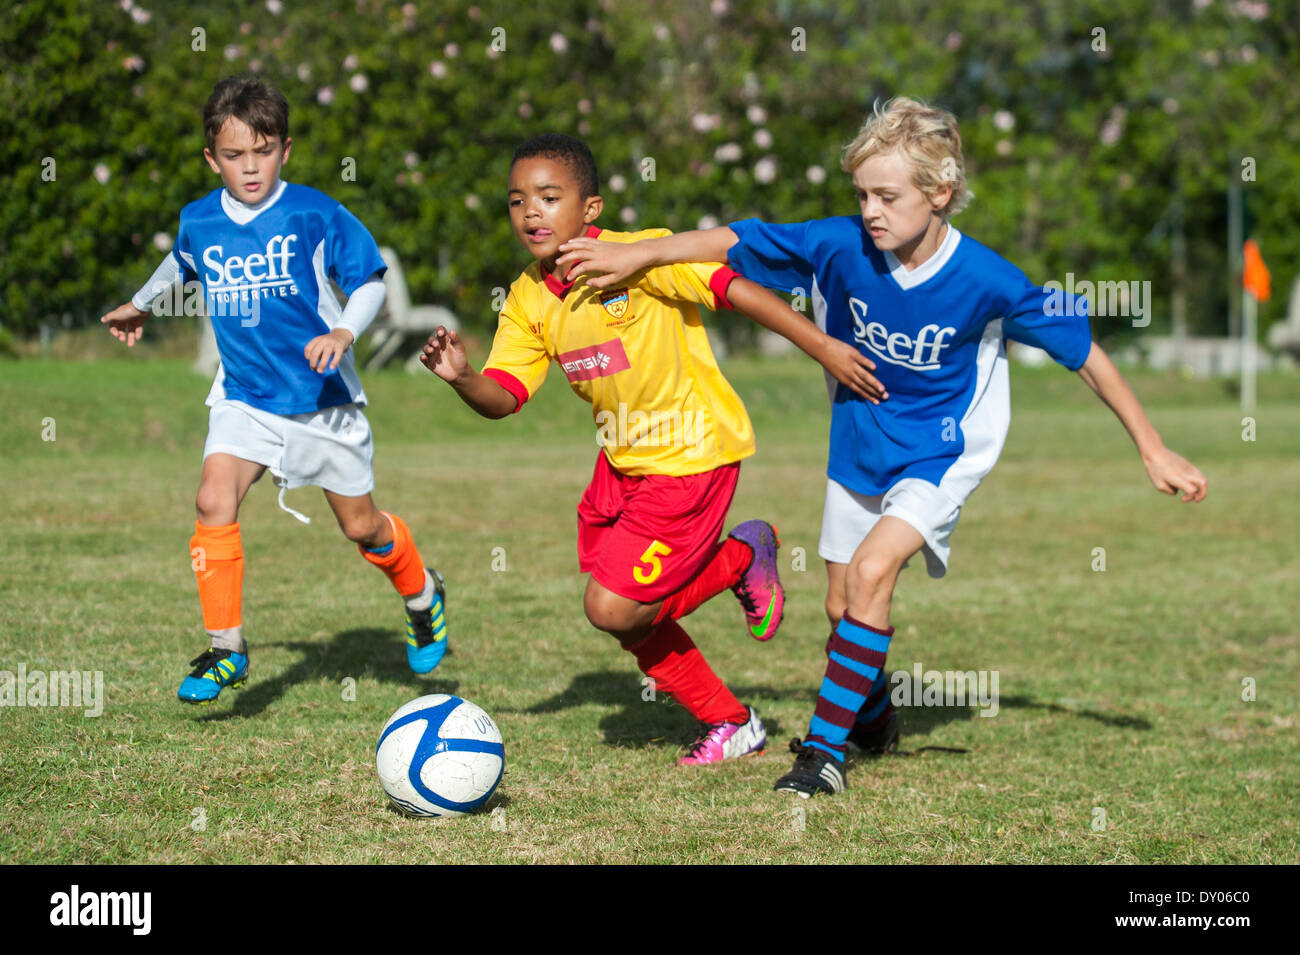 Football players of the U9 youth teams tackling to win the ball, Cape Town, South Africa Stock Photo